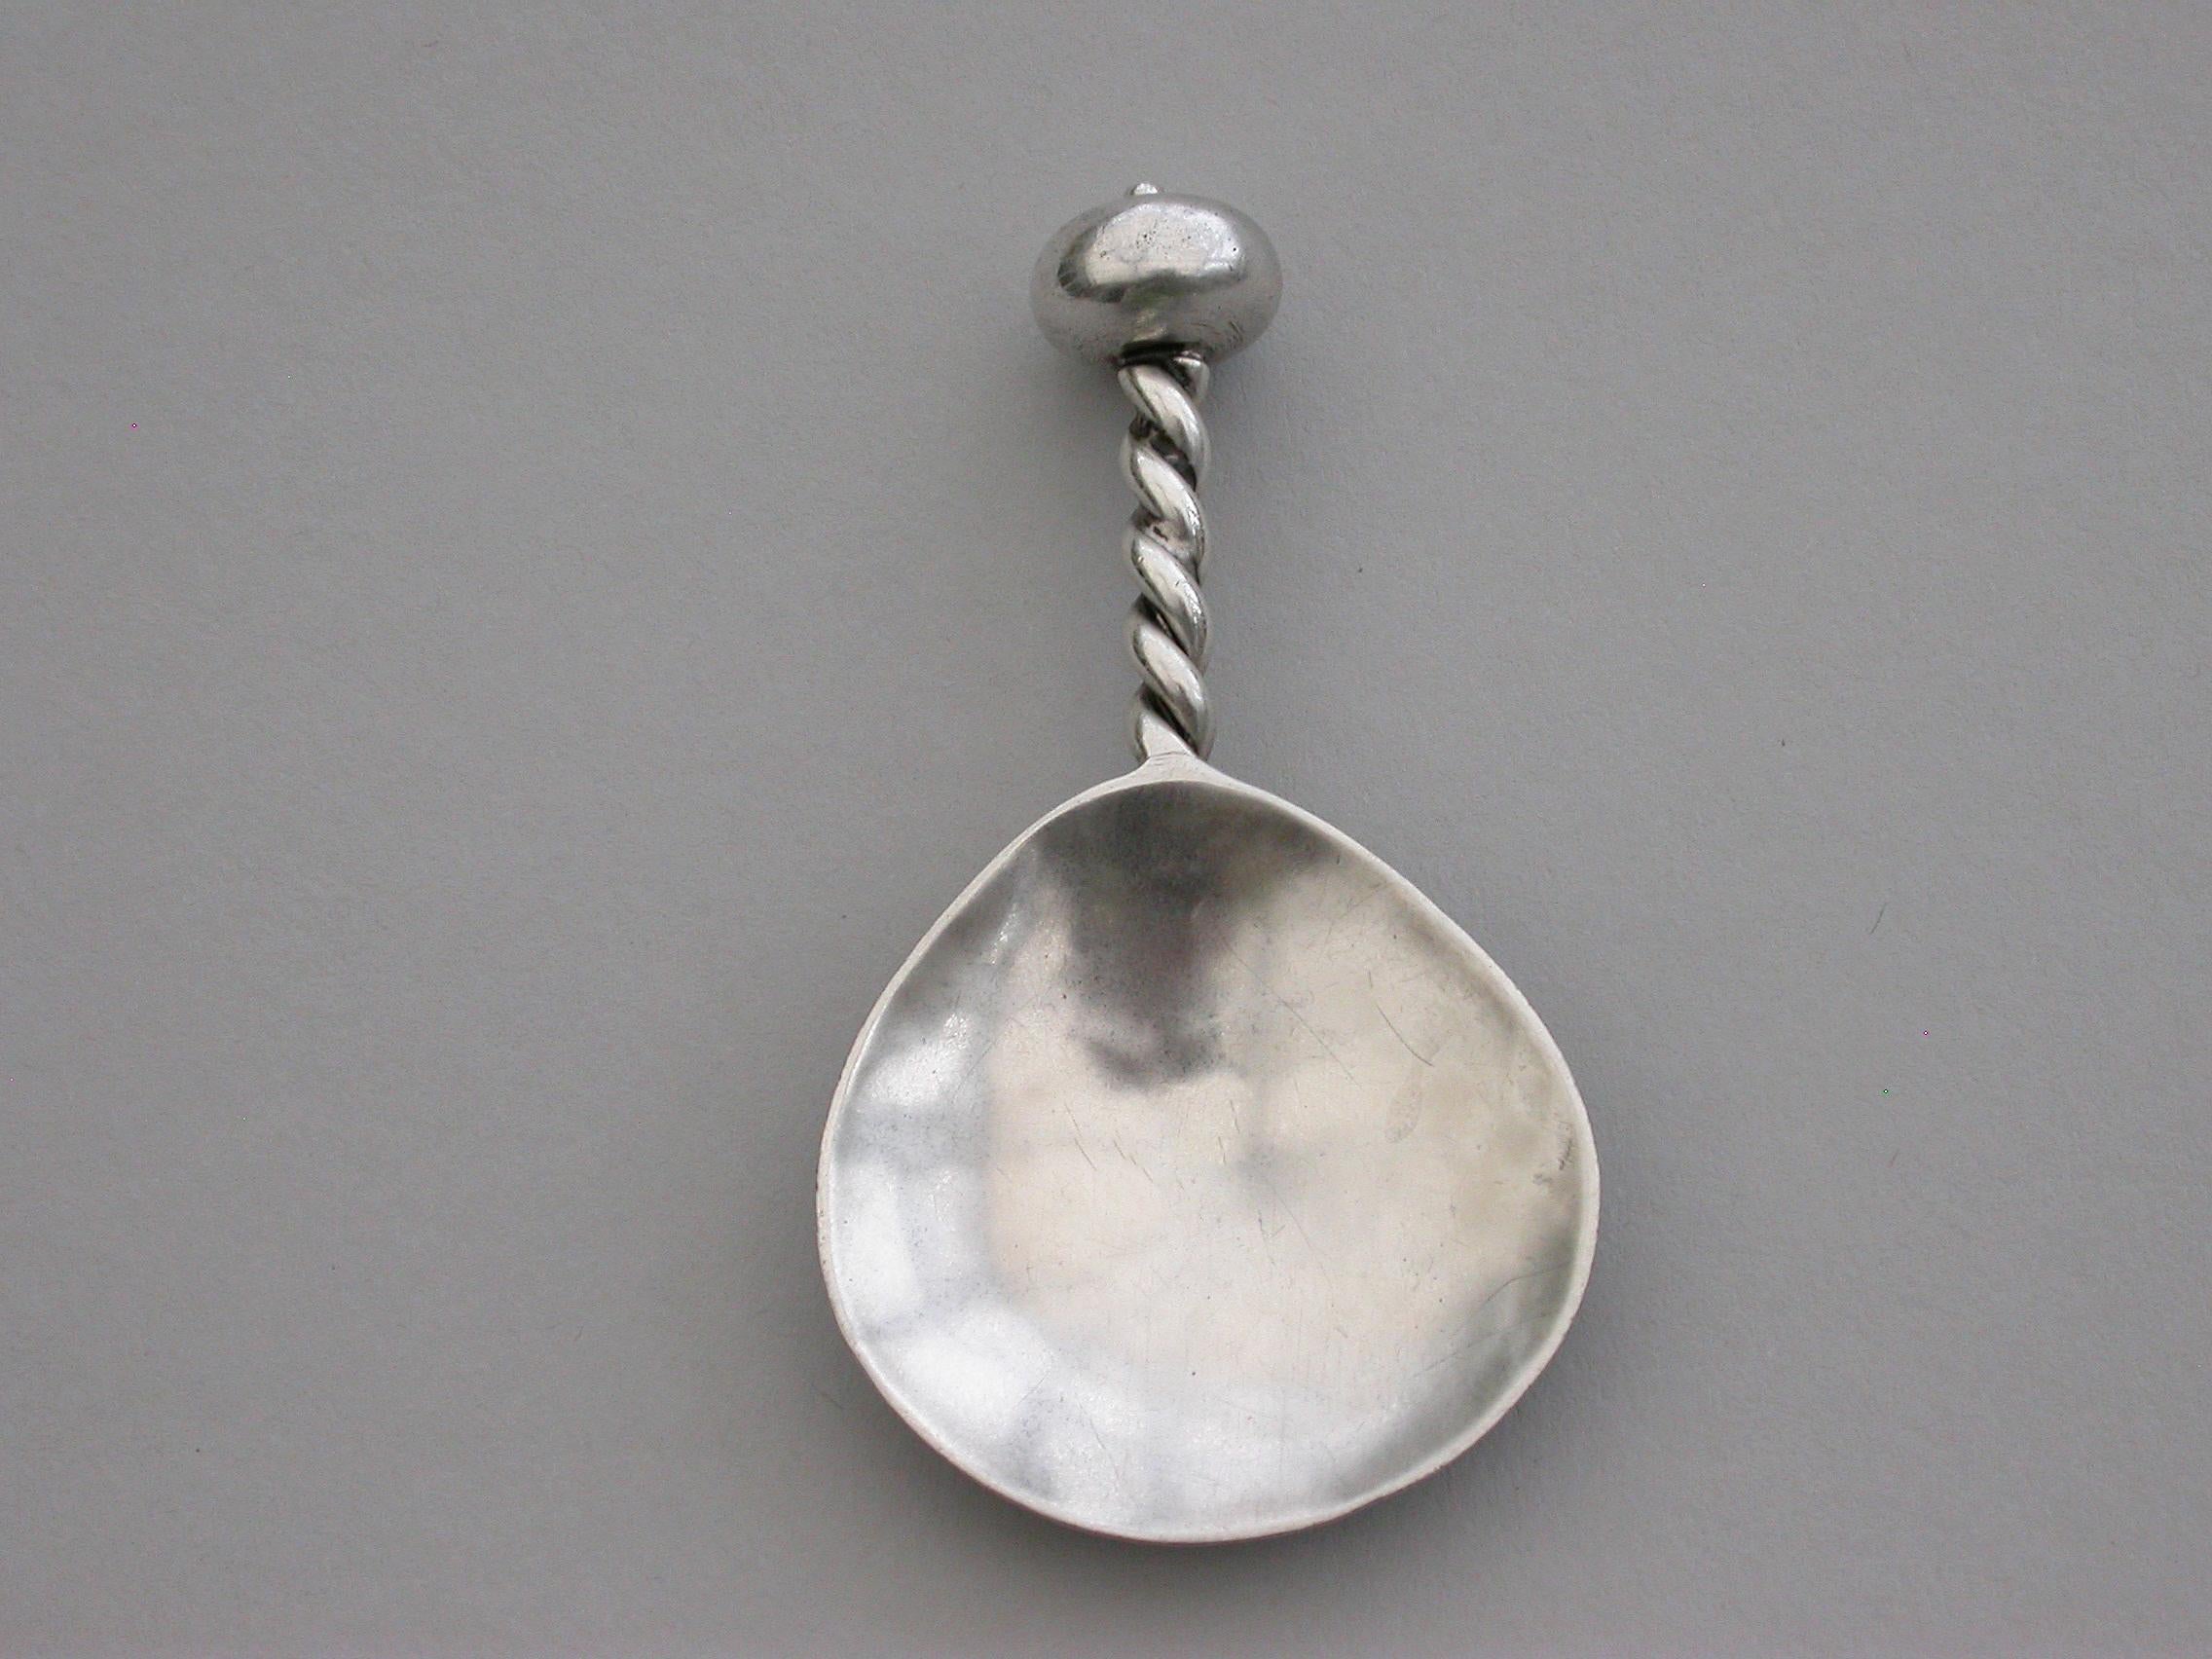 English Early 20th Century Arts & Crafts Silver Caddy Spoon For Sale